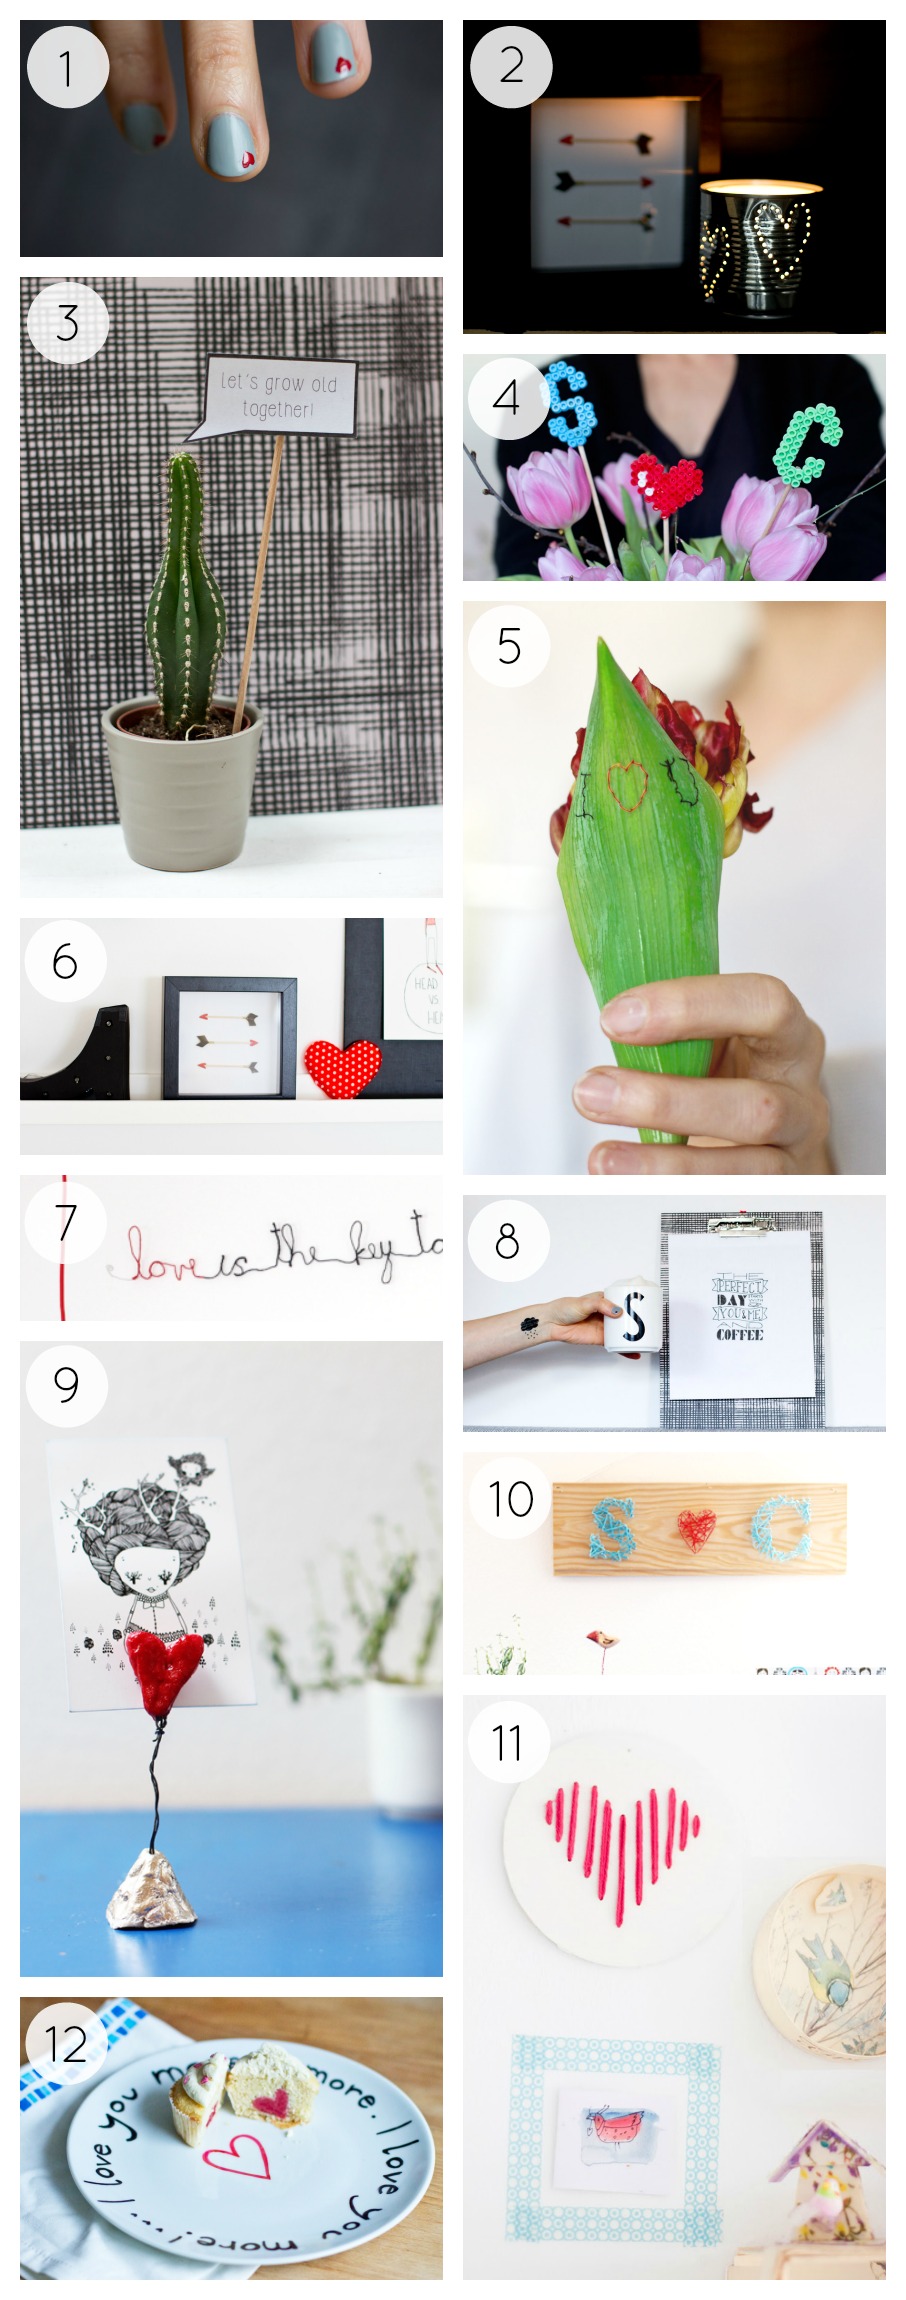 12 DIYs to try for a crafty Valentine's Day | LOOK WHAT I MADE ...